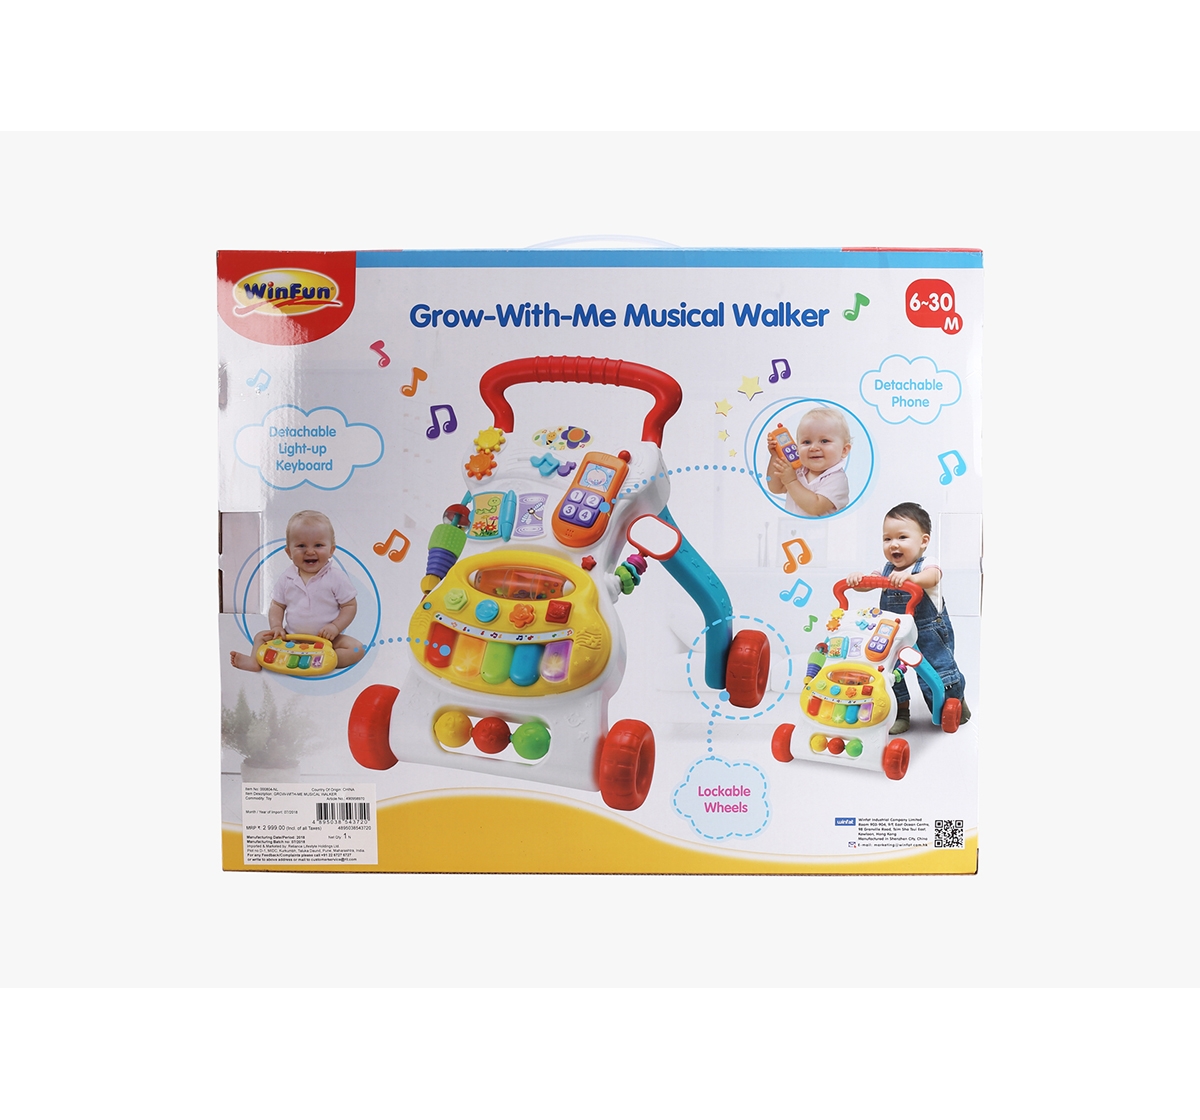 WinFun | Winfun Nl Grow-With-Memusical Walker Baby Gear for Kids age 0M+ 2